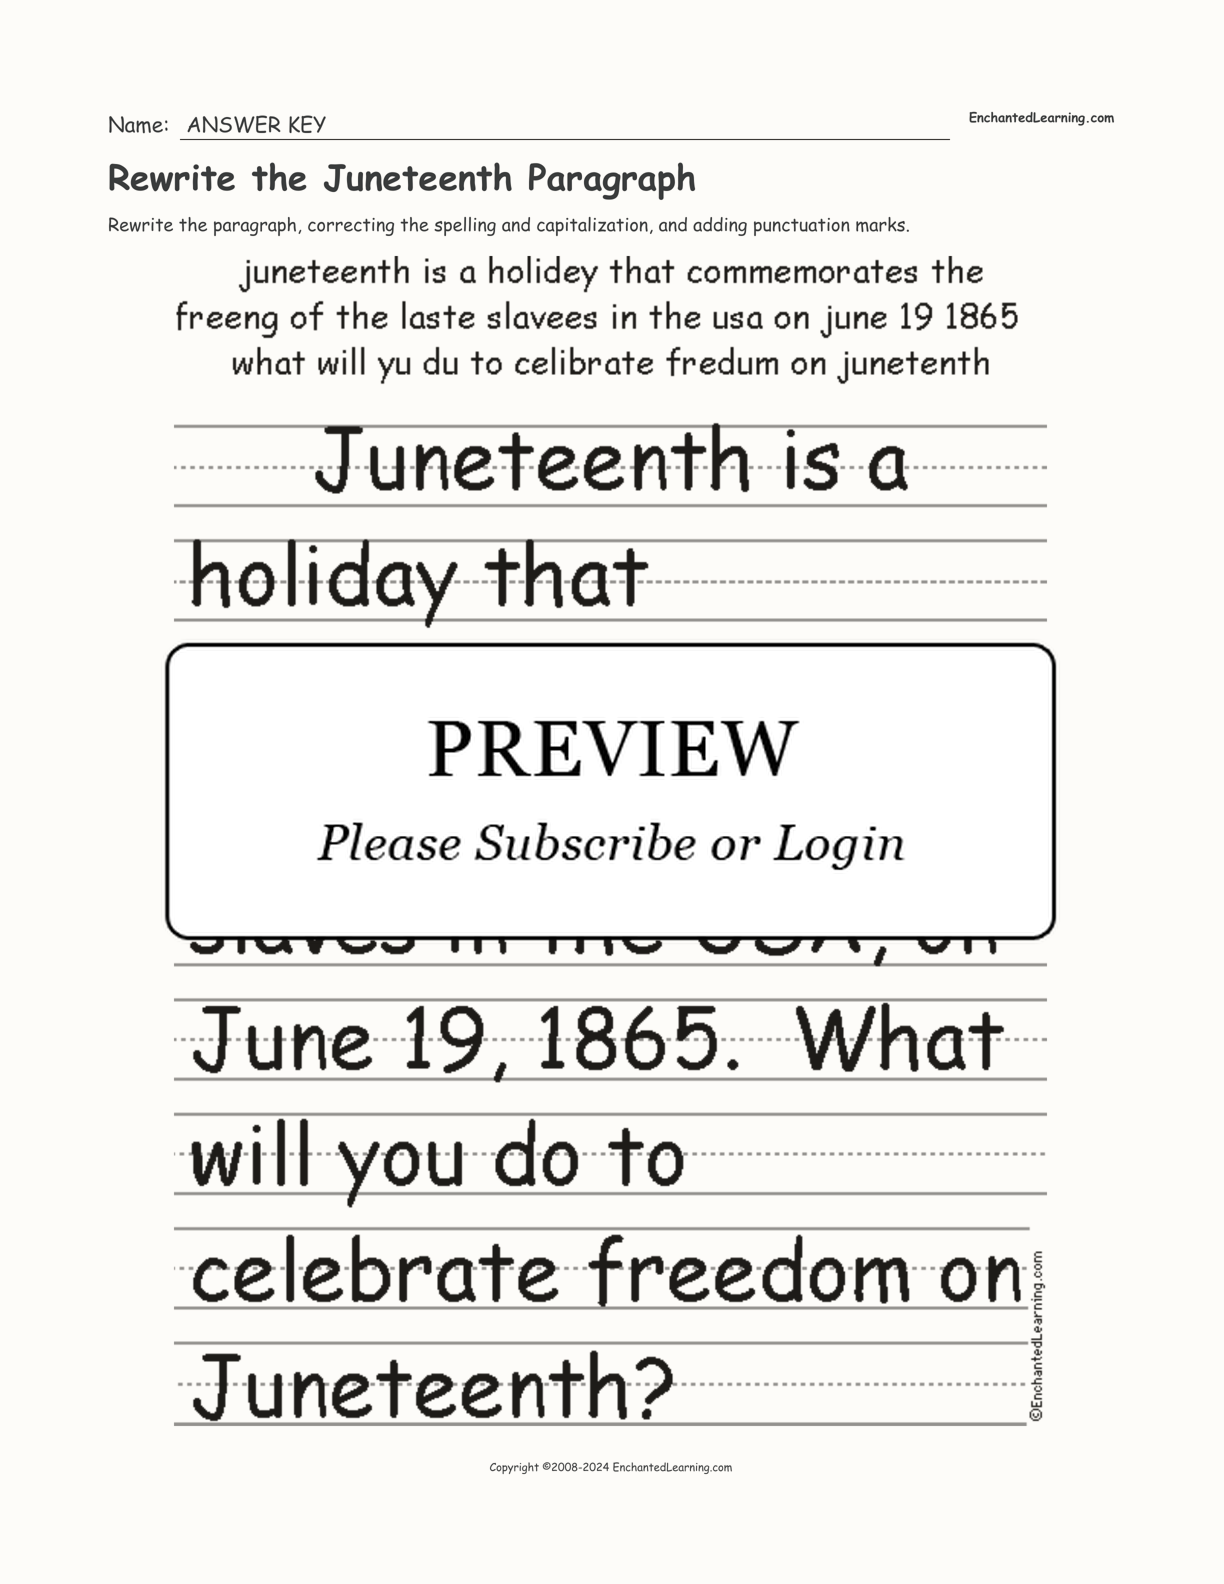 Rewrite the Juneteenth Paragraph interactive worksheet page 2